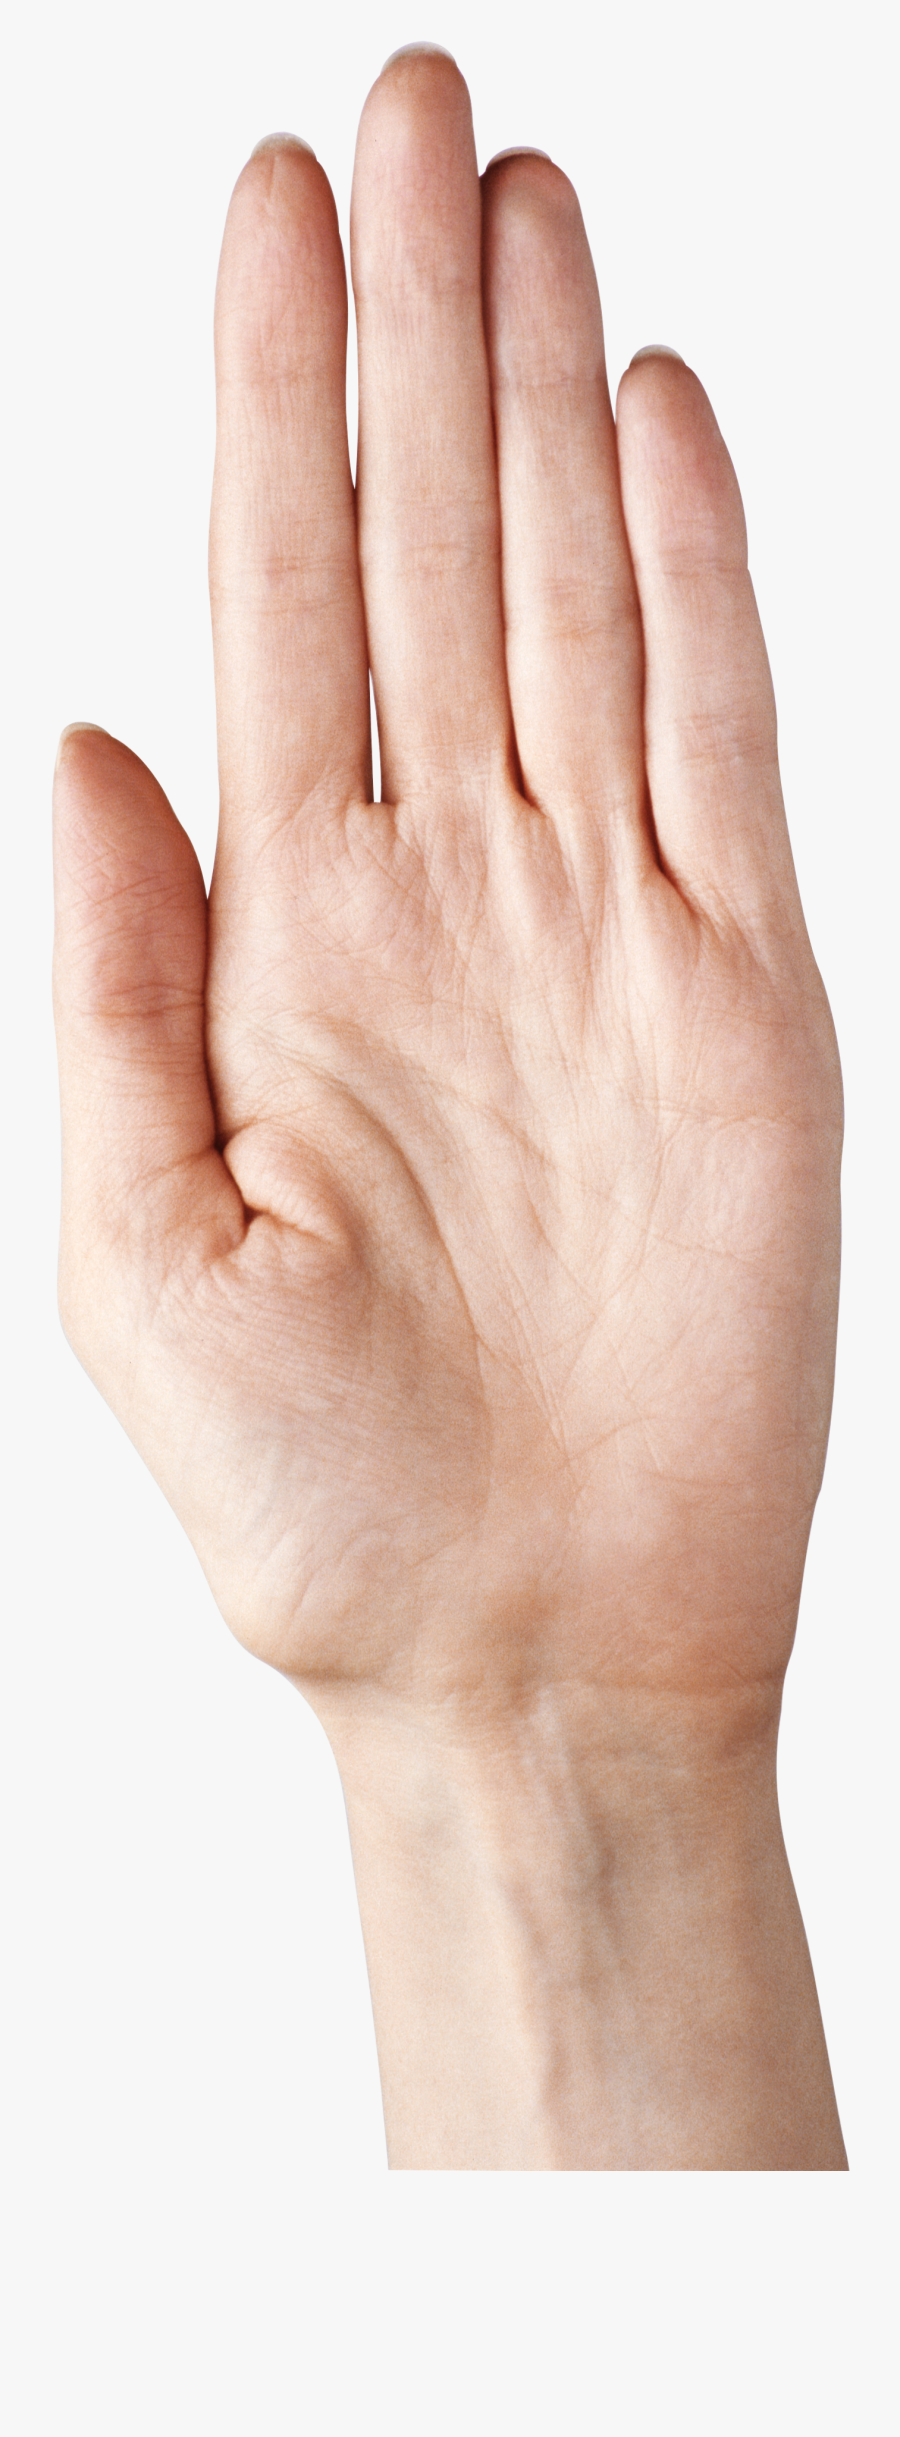 Hand Showing Five Fingers Png Clipart Picture - Palm Of Hand Png, Transparent Clipart